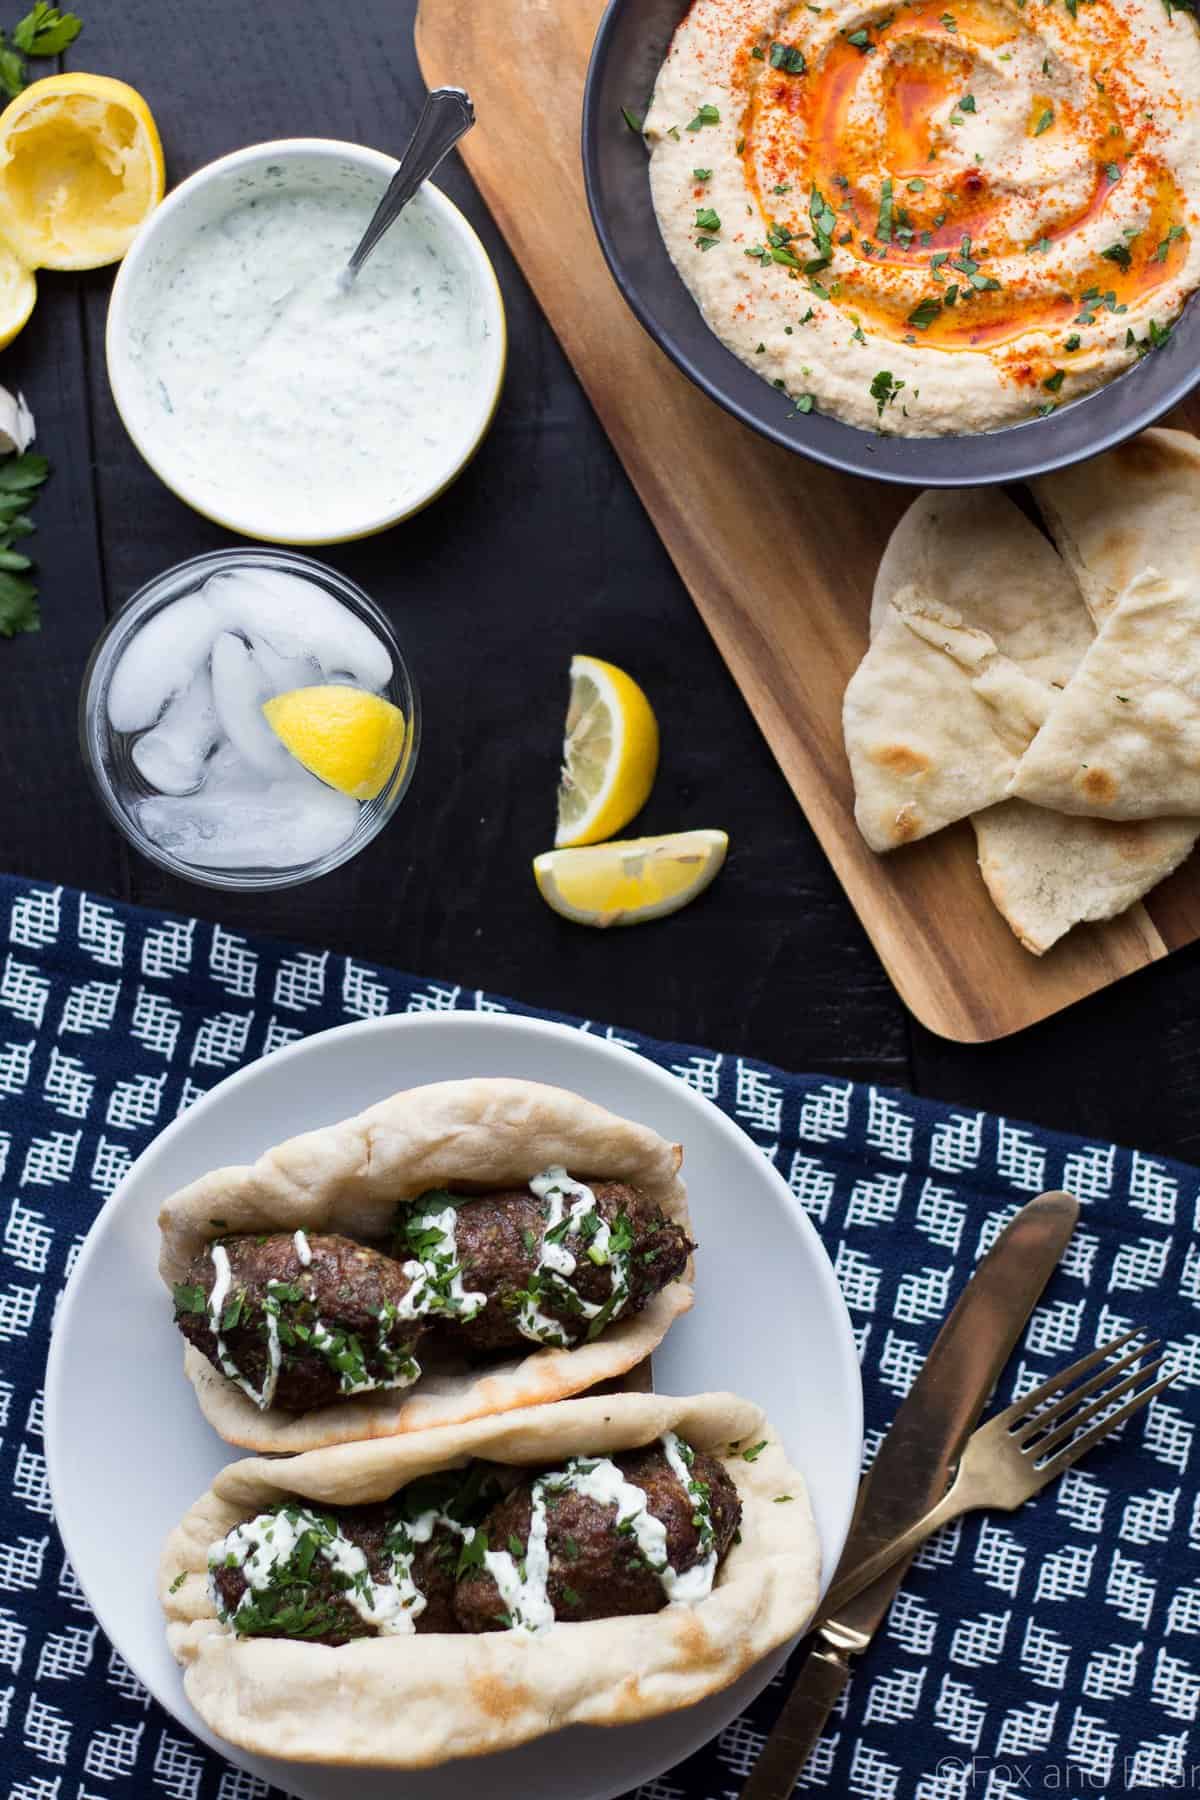 These Grilled Lamb Kofta Kebabs are spiced middle eastern meatballs that you can grill or bake in the oven!